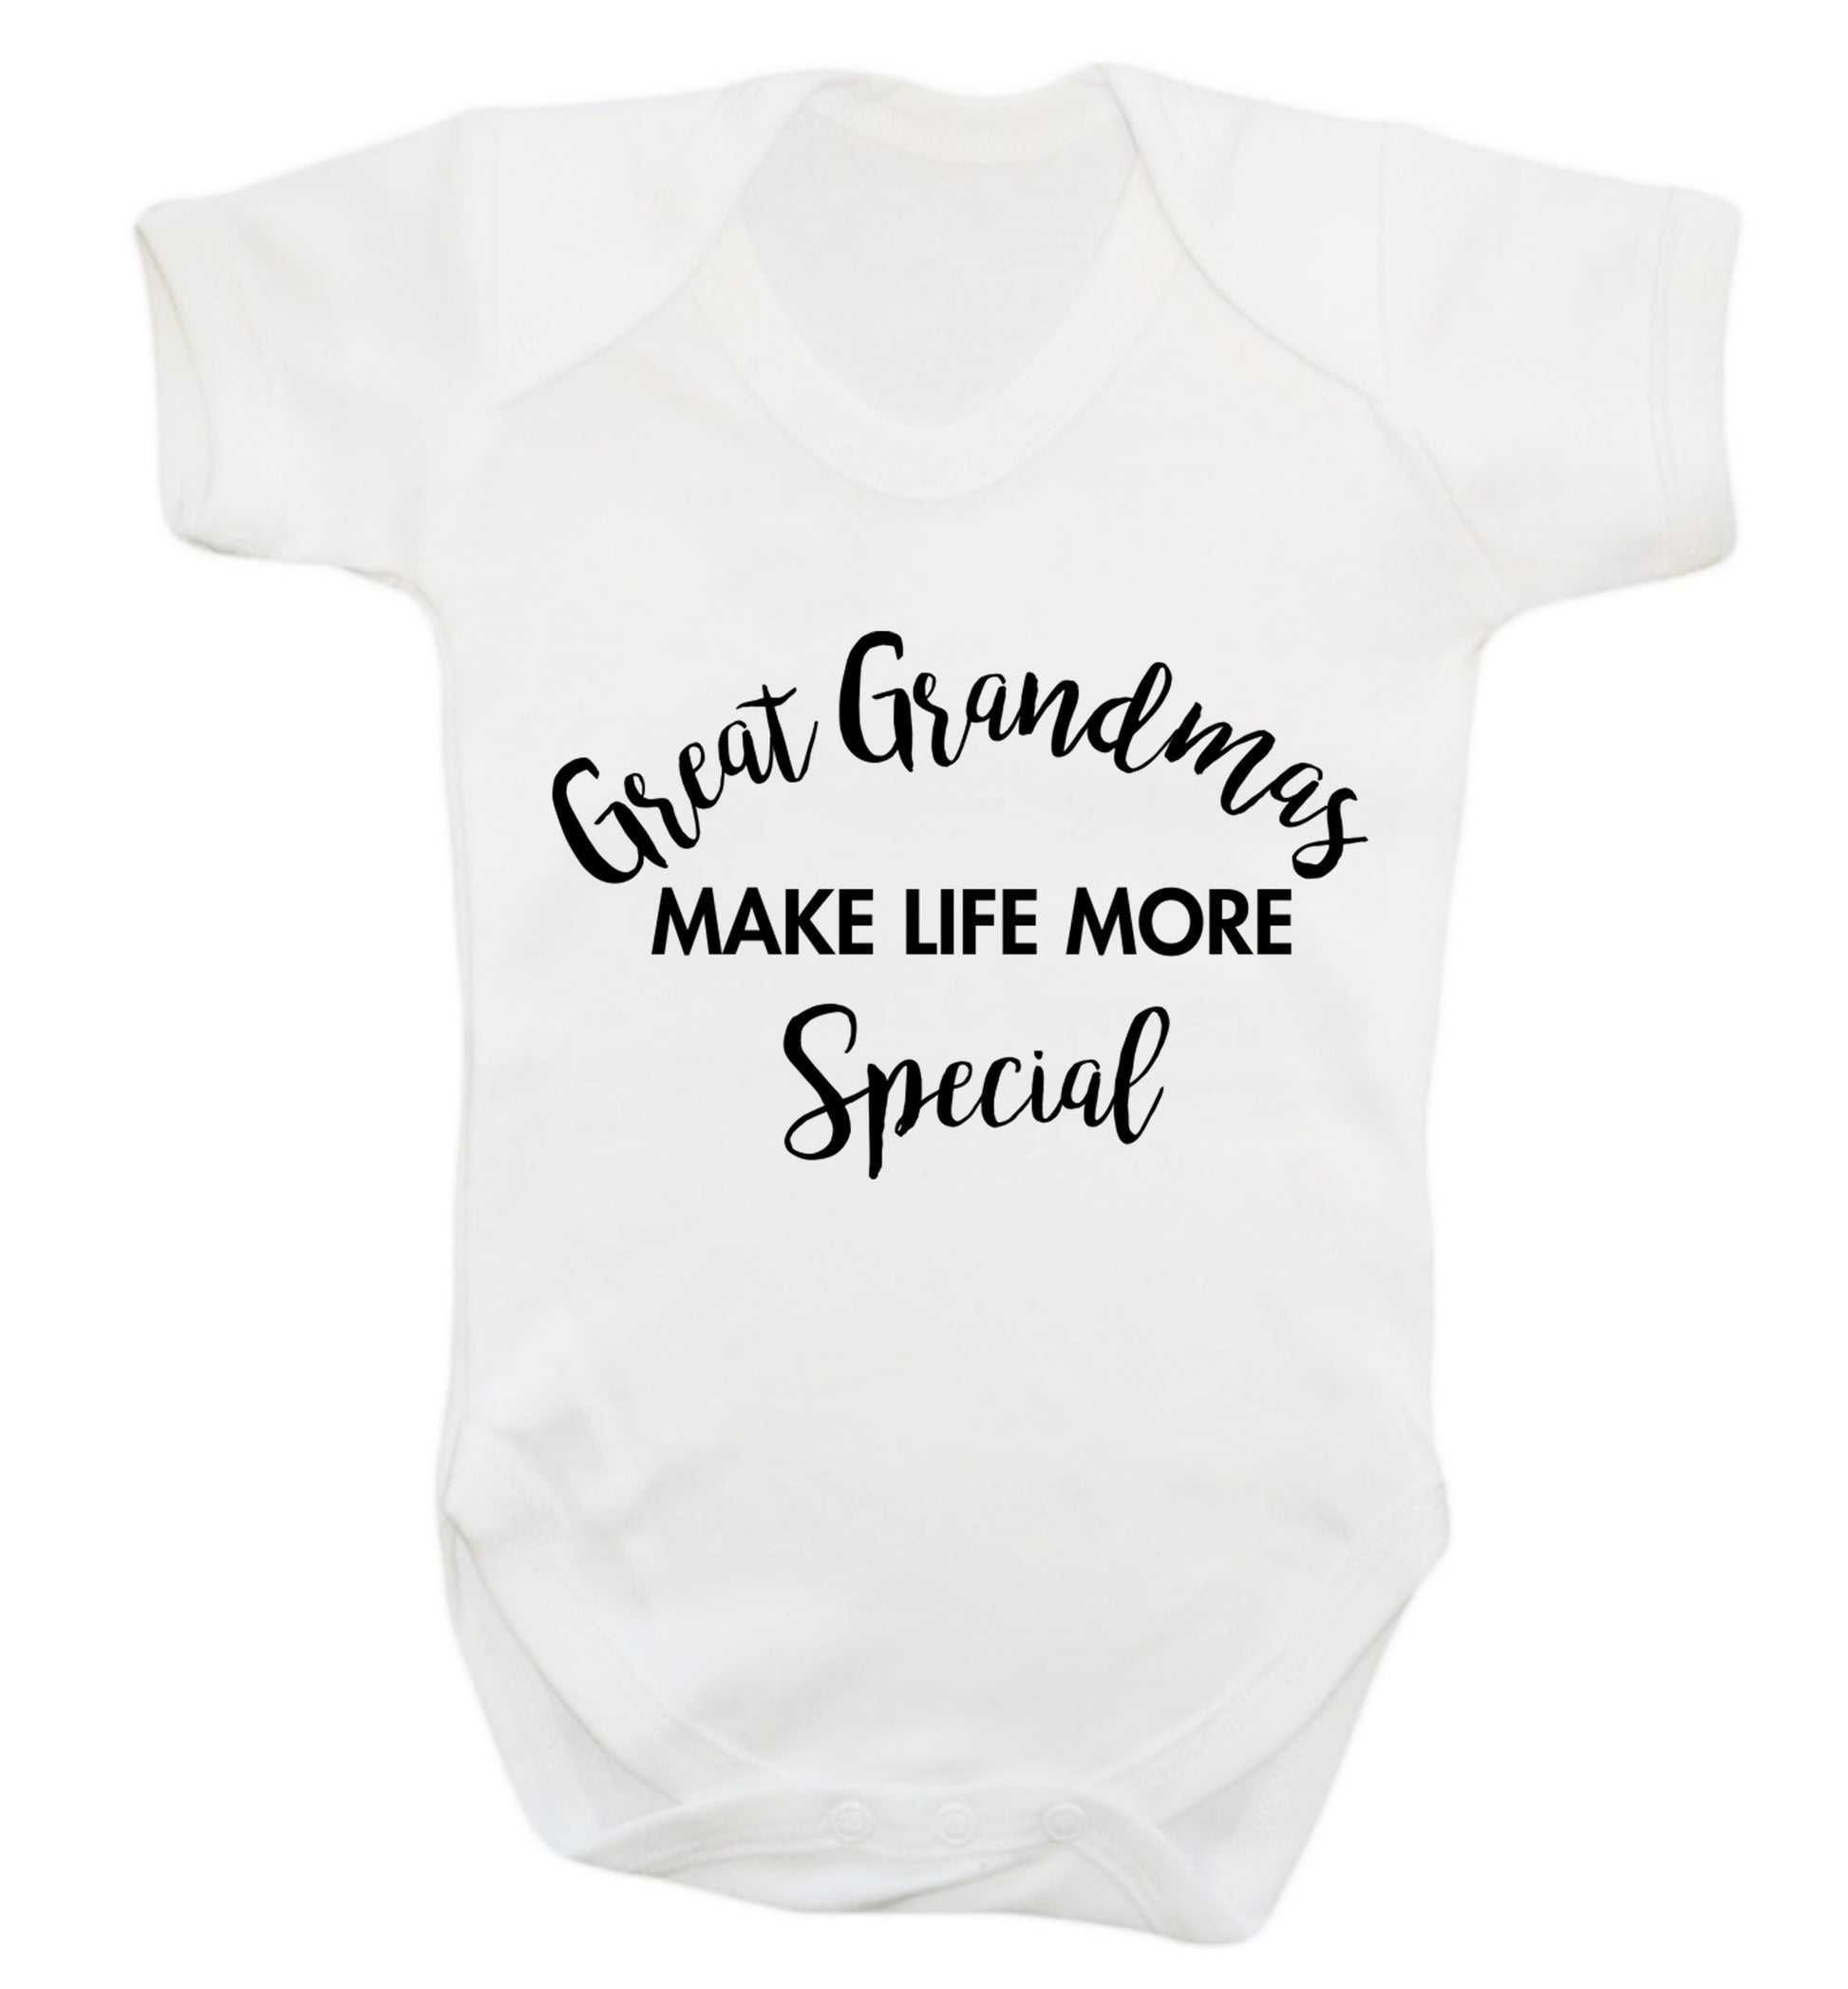 Great Grandmas make life more special Baby Vest white 18-24 months